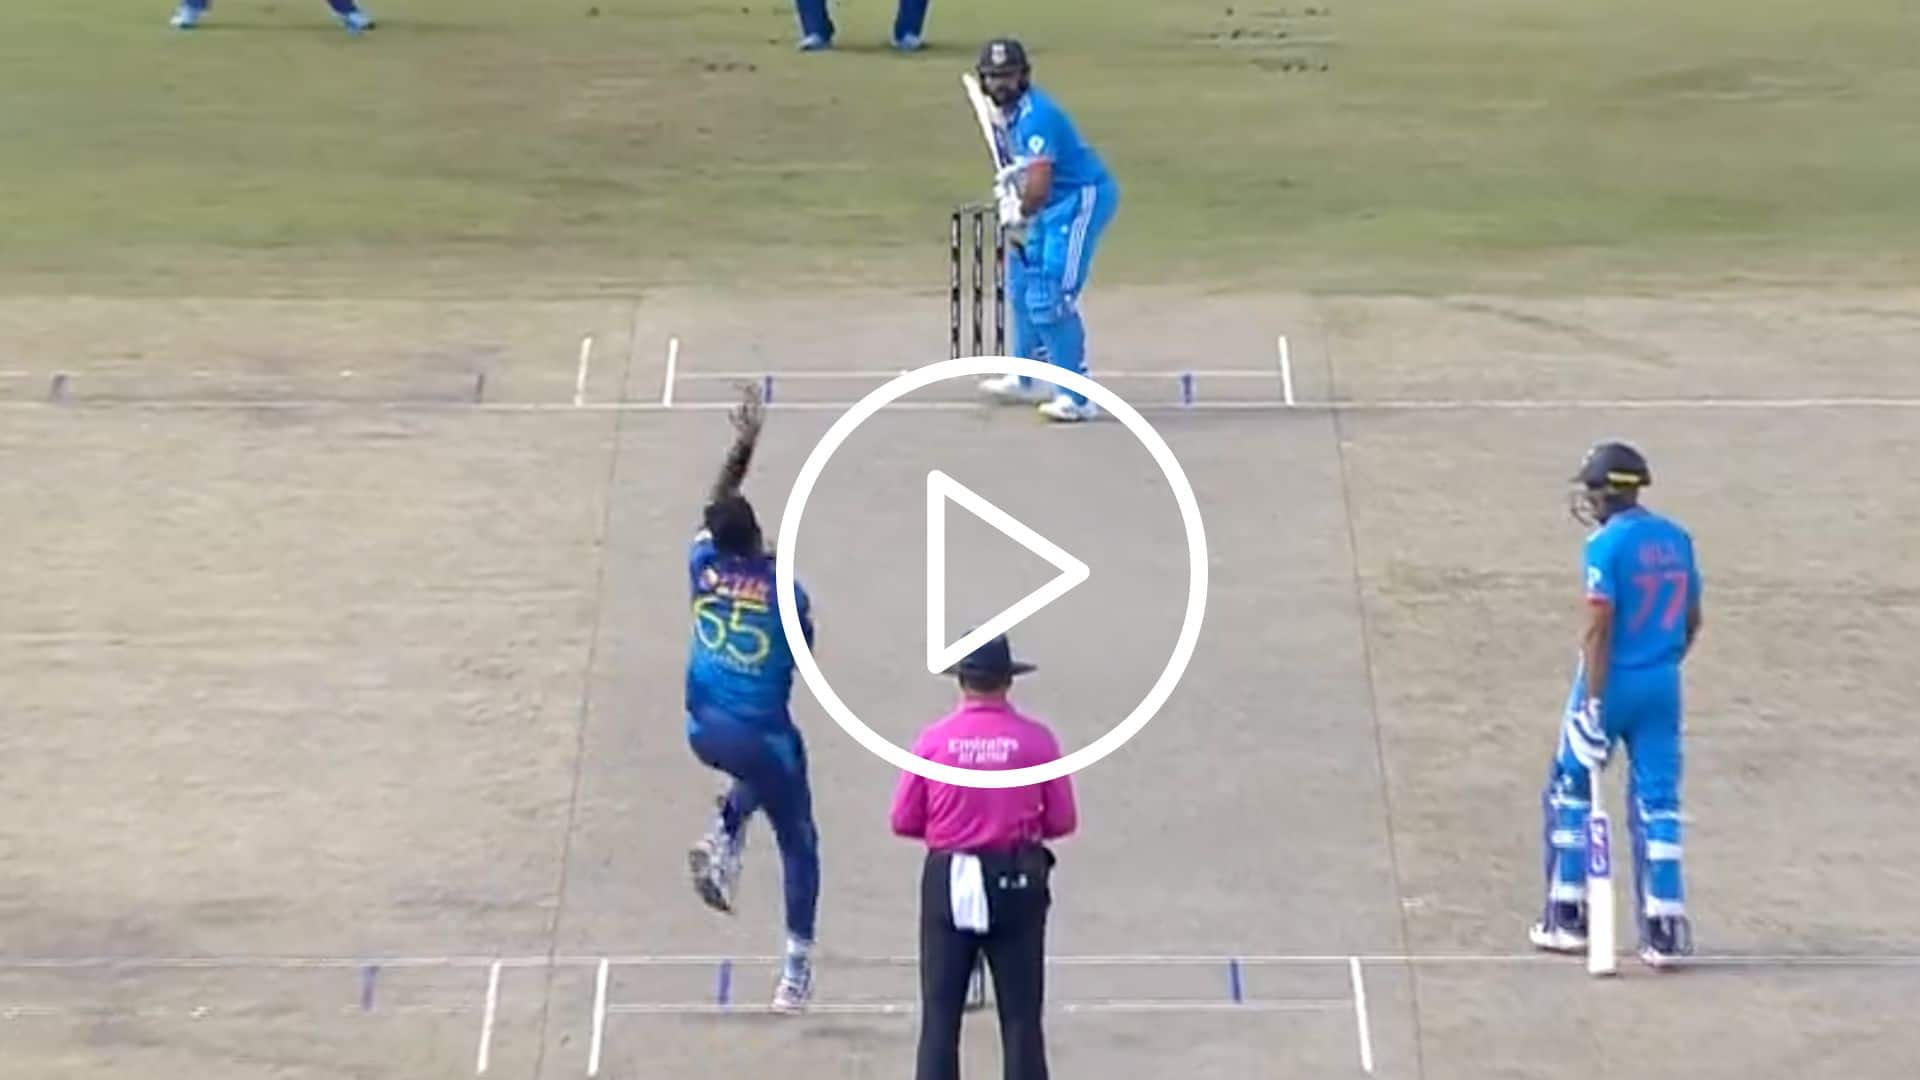 [Watch] Rohit Sharma Oozes Class With Picturesque Cover Drive Off Kasun Rajitha